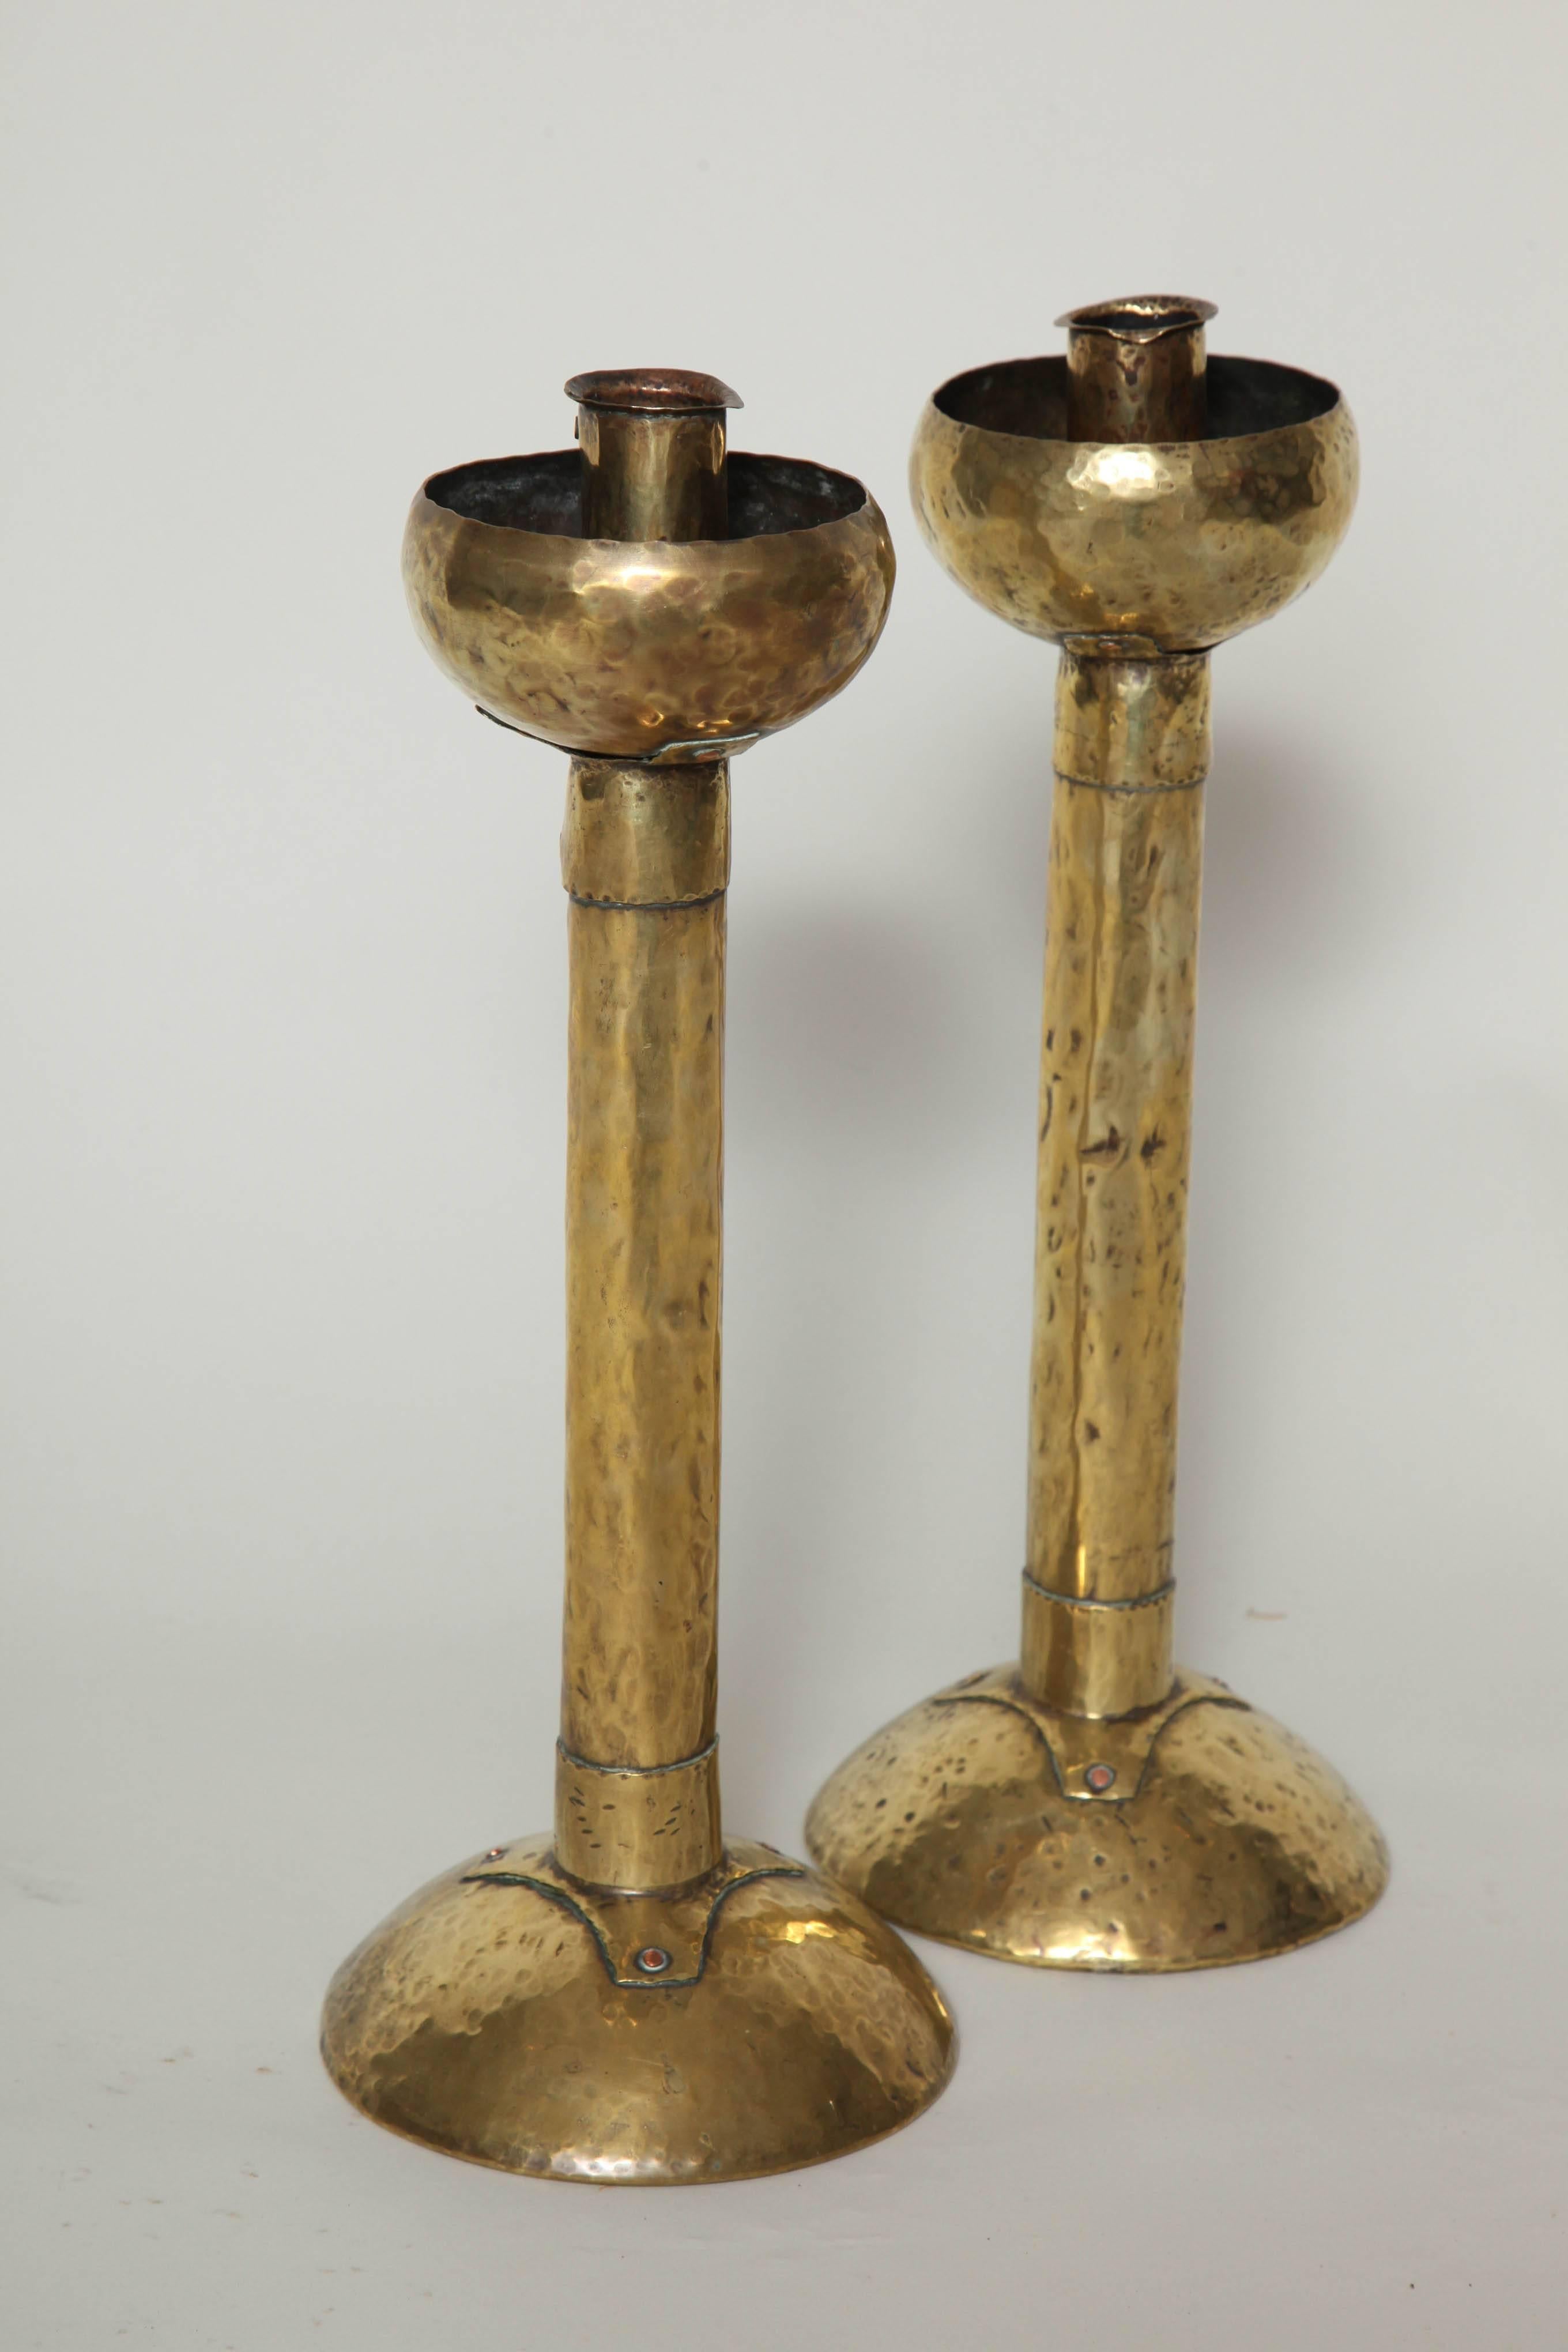 Unusual pair of English or Scottish hammered brass candlesticks, the half spherical cups and bases connected by even waisted shafts fastened by hand-hammered rivets, the whole of pleasing design.